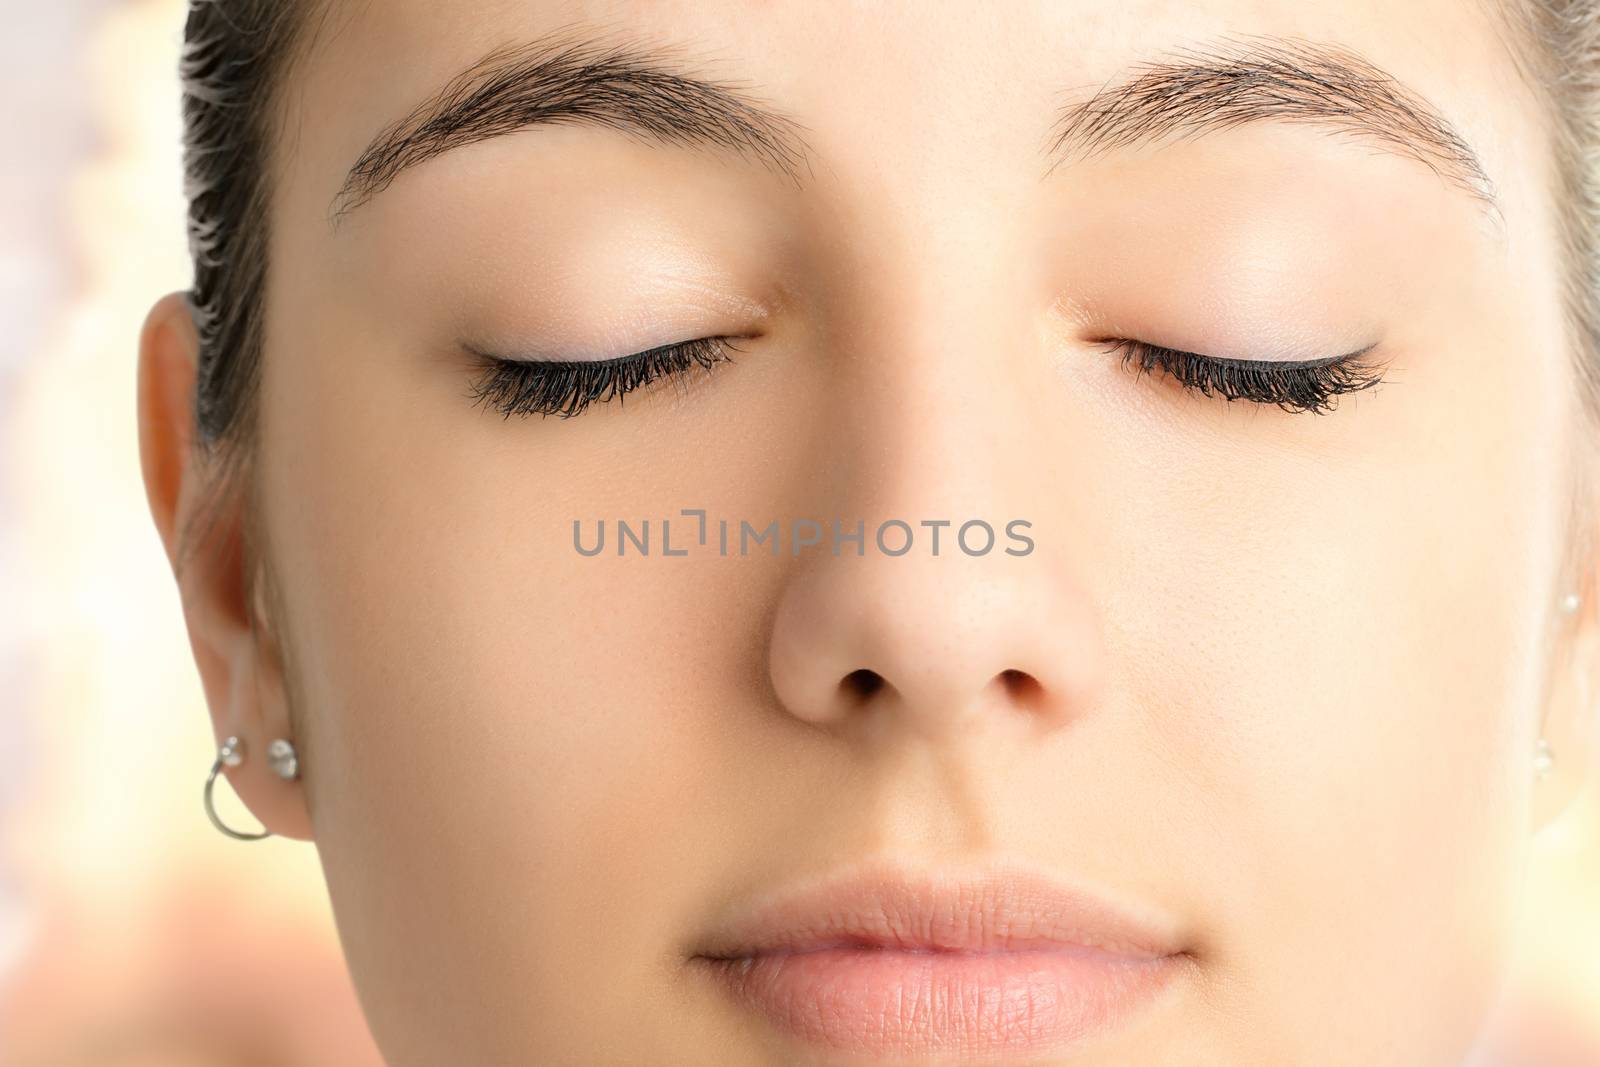 Extreme close up face shot of attractive young woman meditating with eyes closed against colorful bright background.